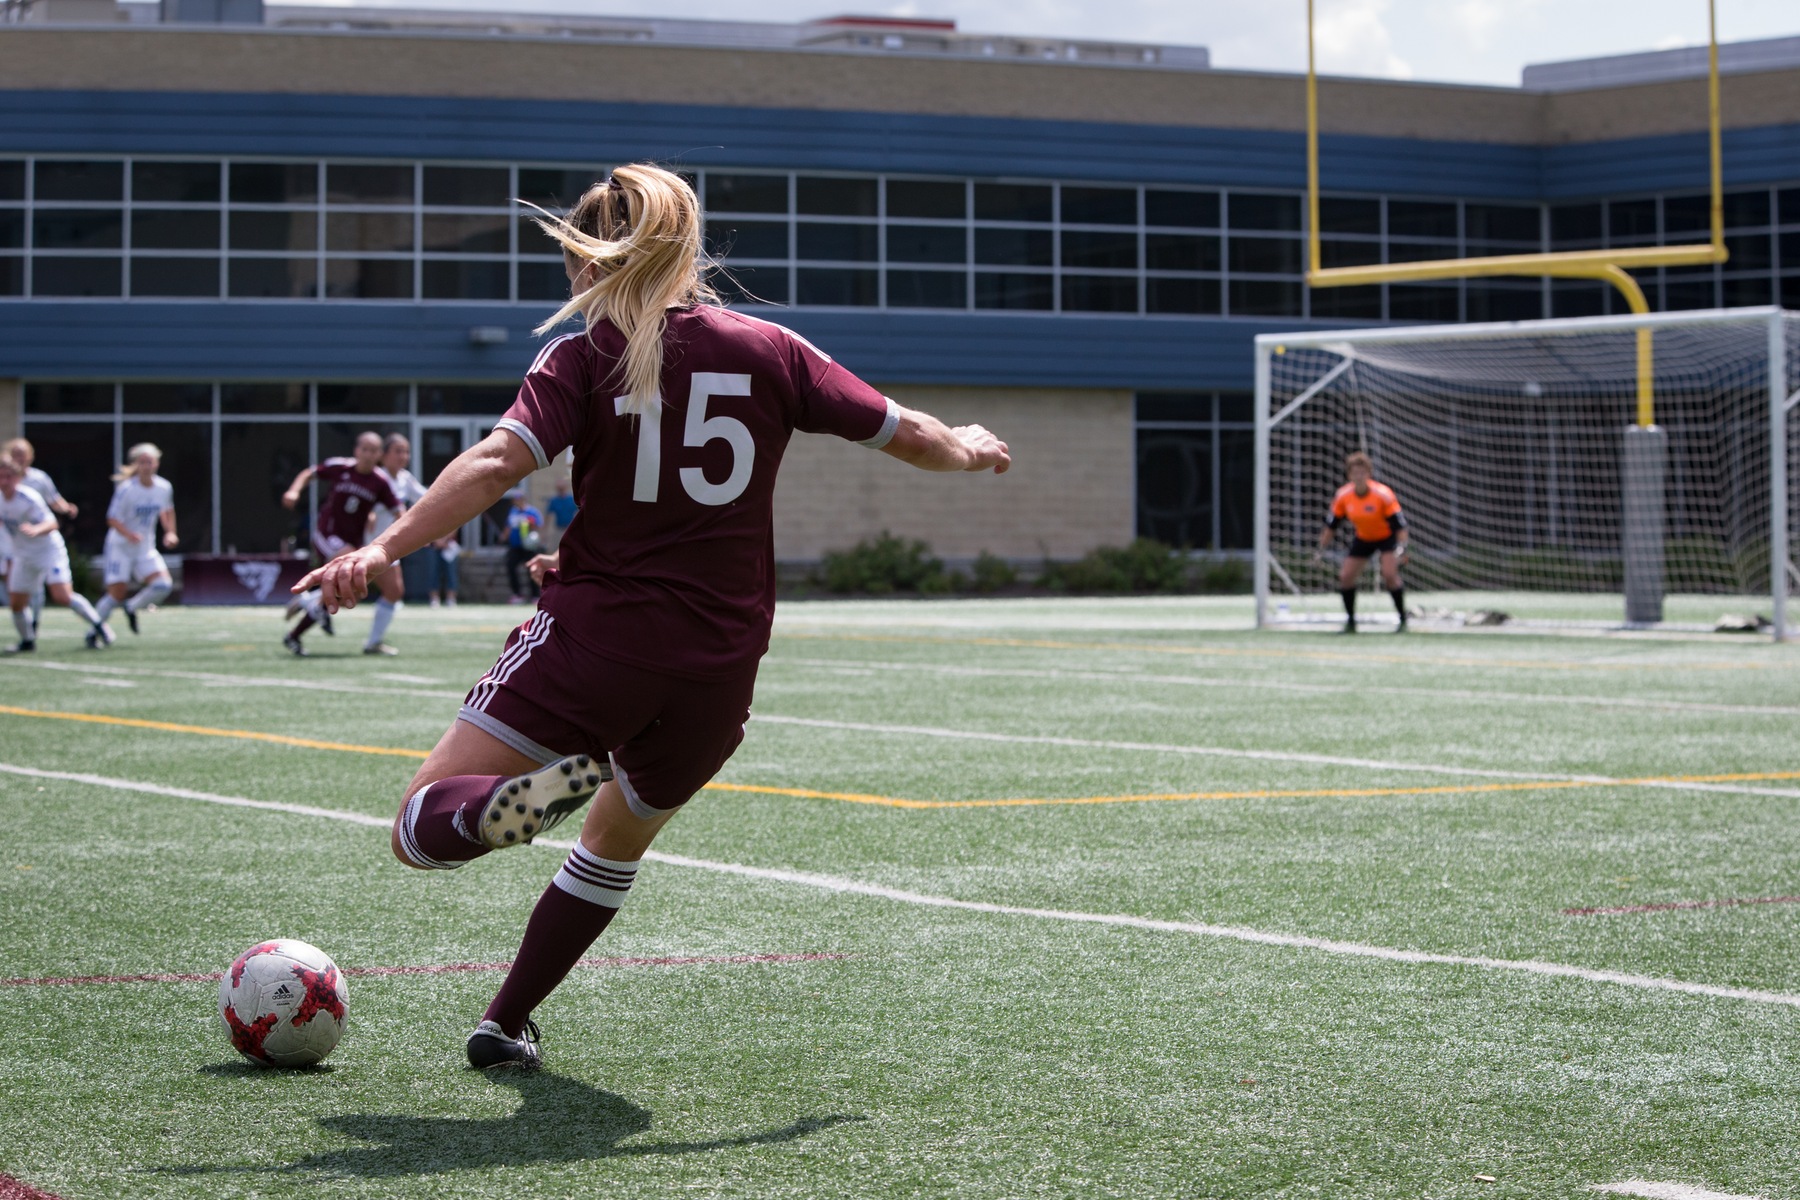 Women's soccer player number 15 seen from back preparing for free kick